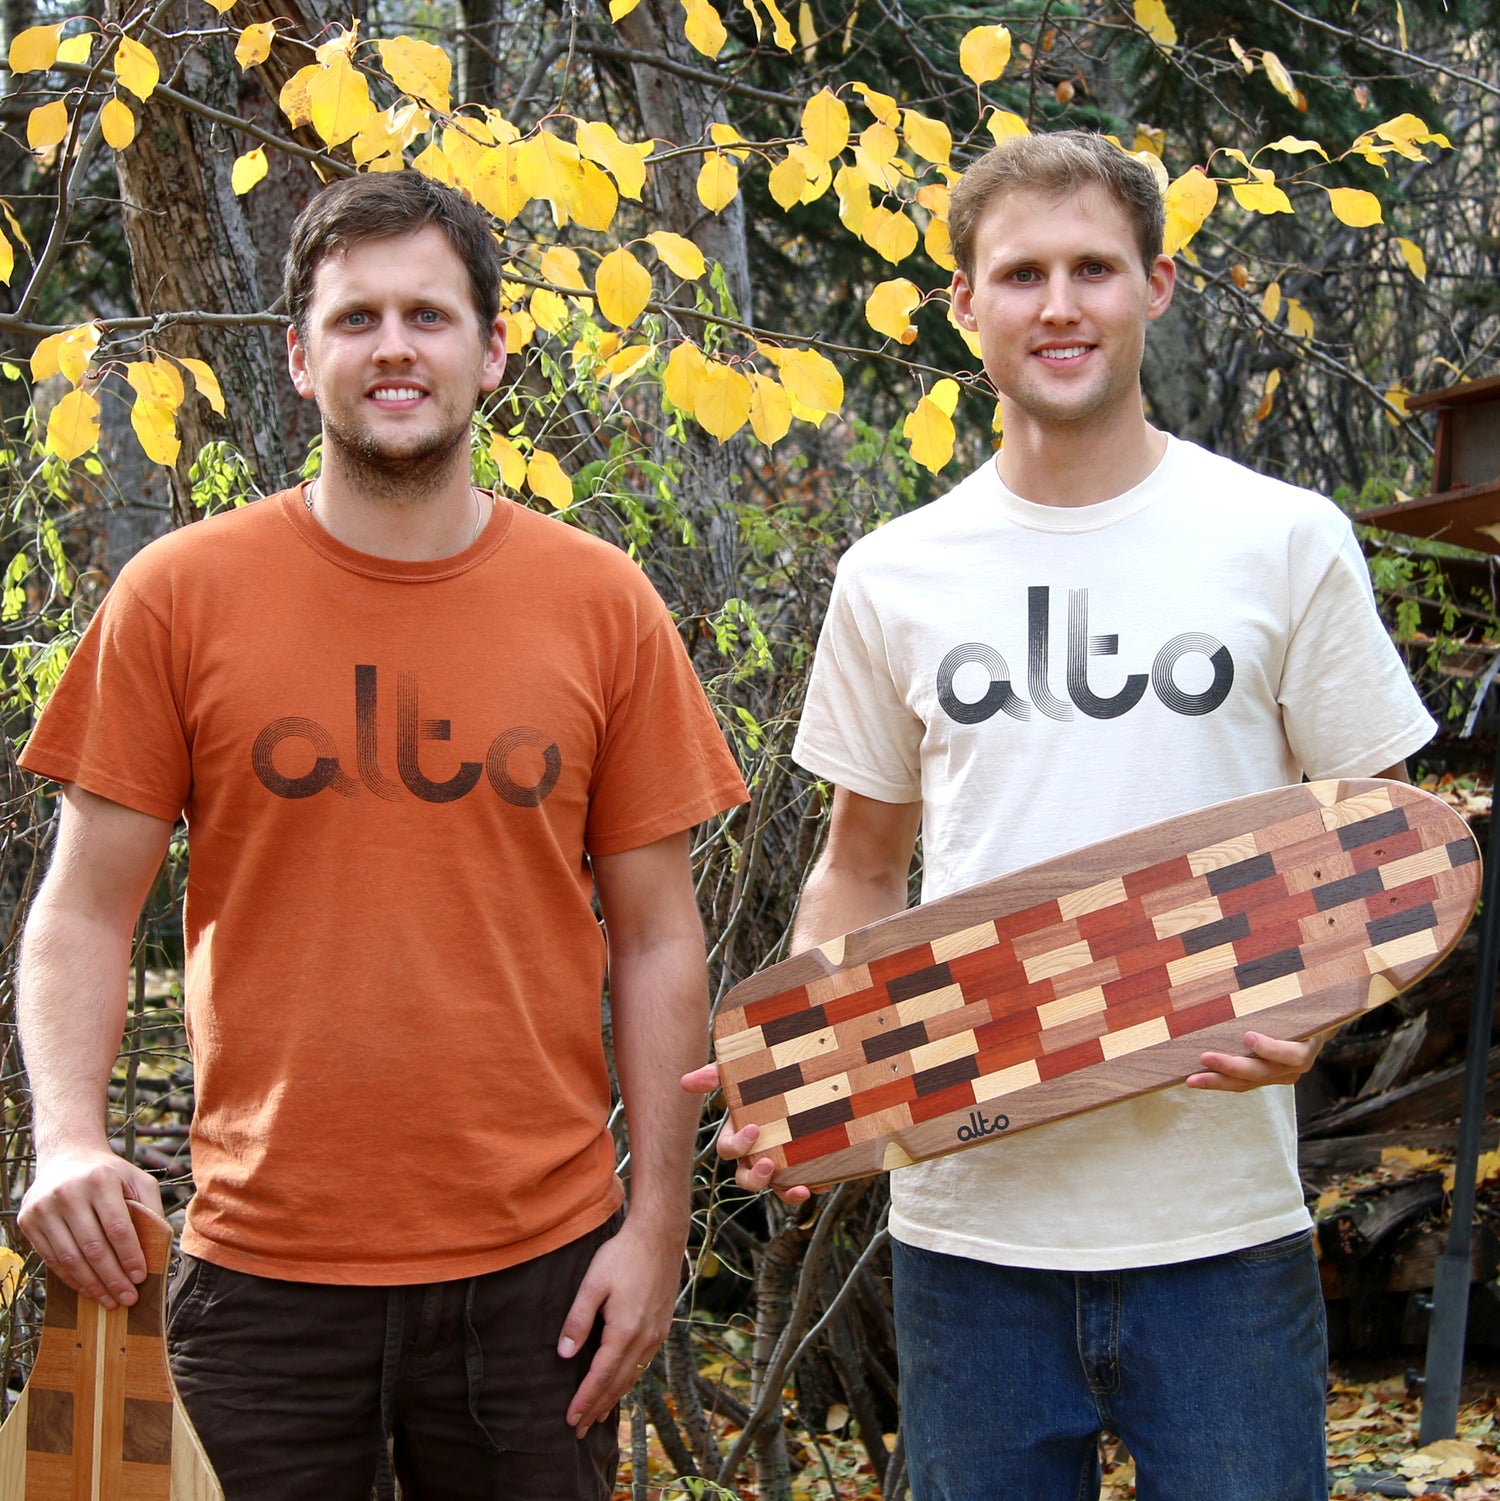 Two men standing with logo thirts. One in orange and one in white. The man on the right is holding a wooden skateboard